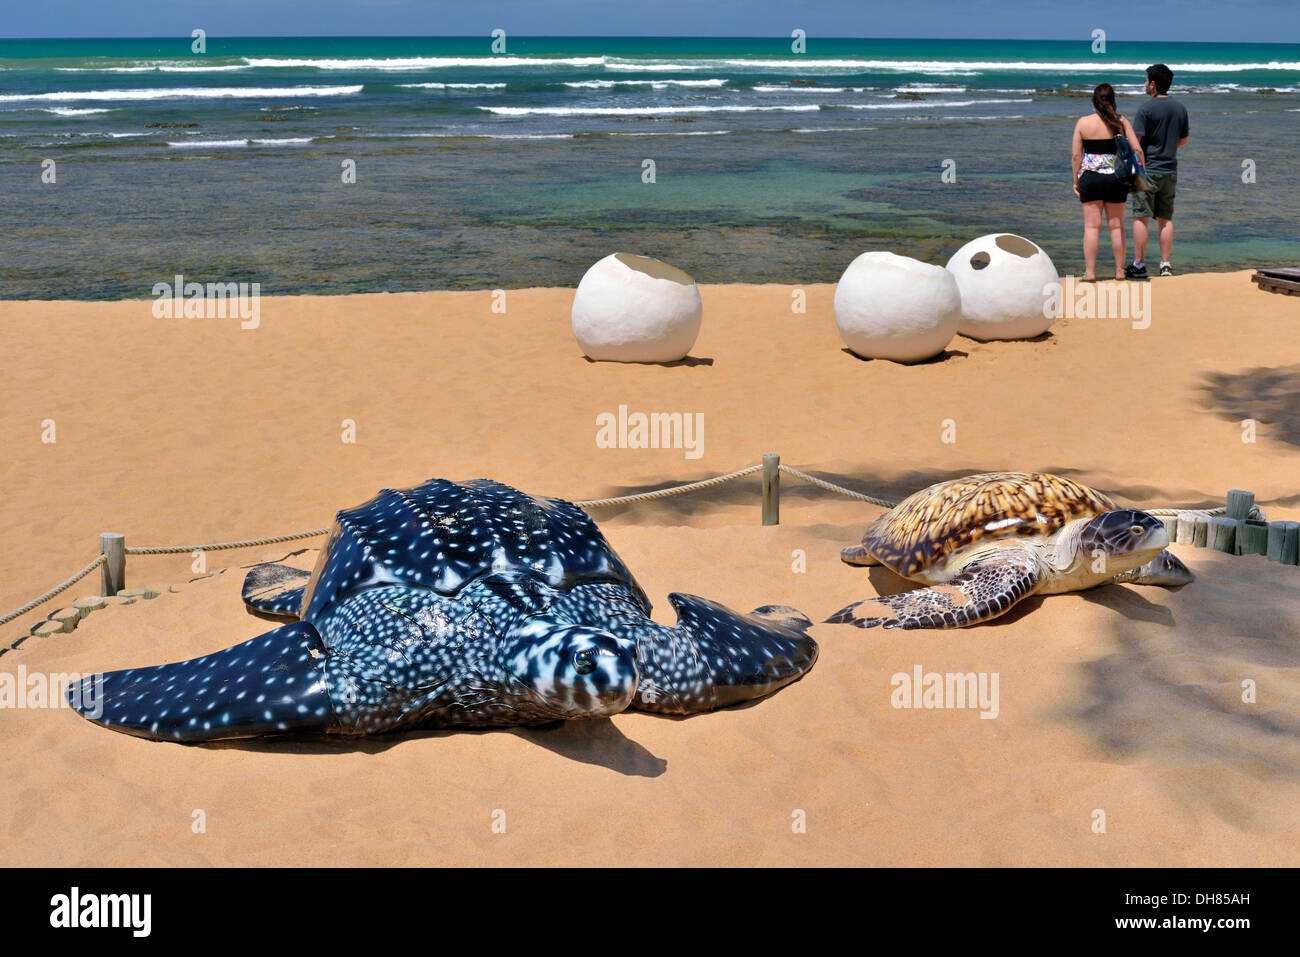 Brazil, Bahia: Model turtles and eggs at the entrance of Environmental project TAMAR in Praia do Forte Stock Photo